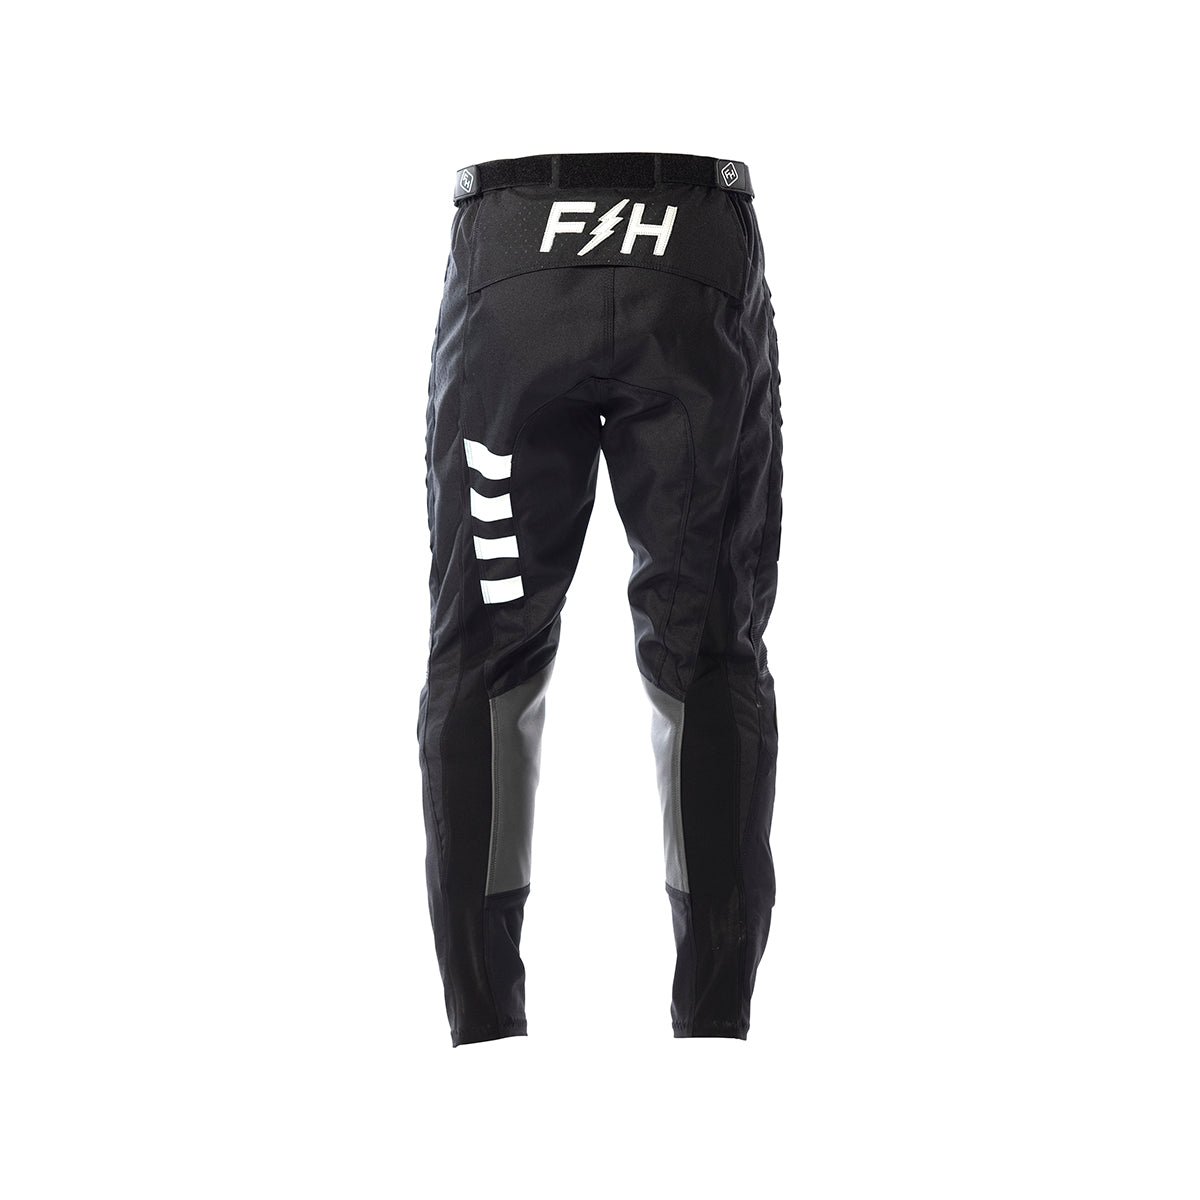 Grindhouse Youth Pant - Black